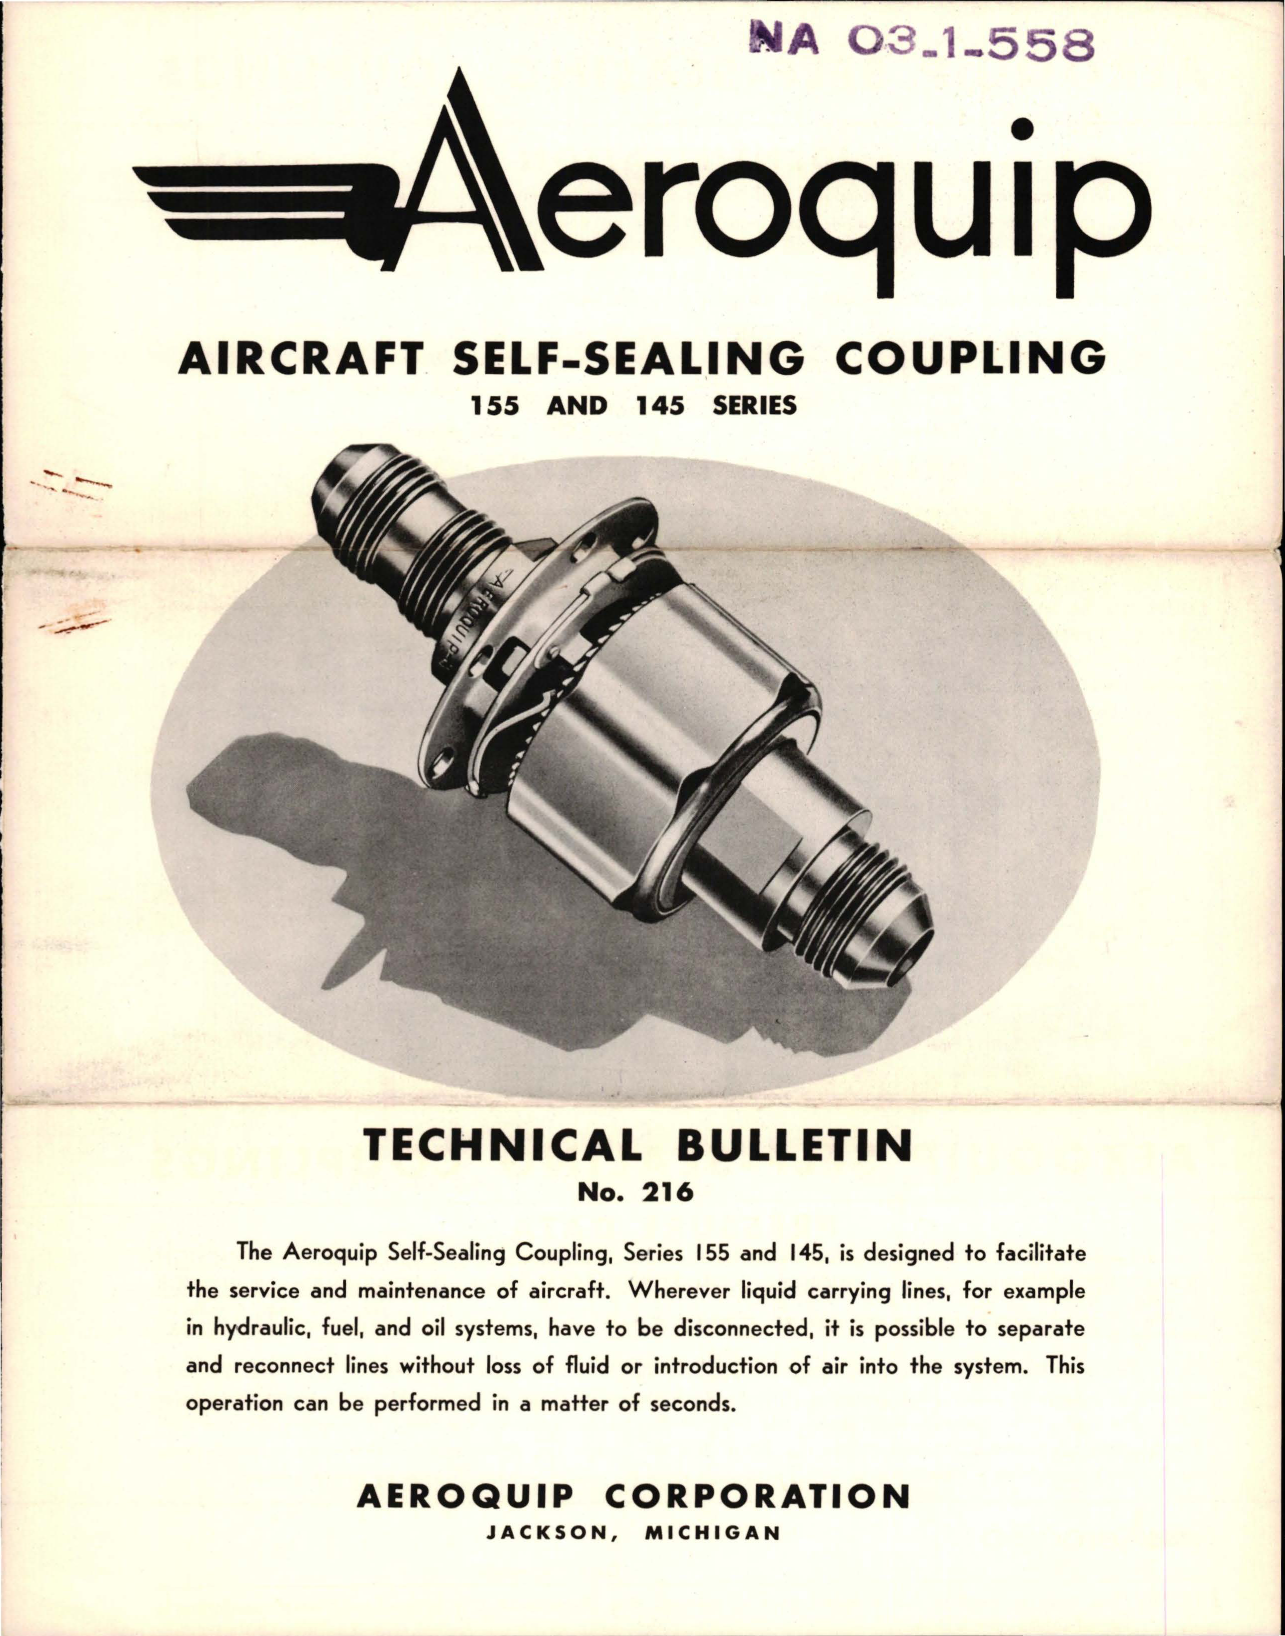 Sample page 1 from AirCorps Library document: Technical Bulletin No. 216 for Self Sealing Coupling - 155 and 145 Series